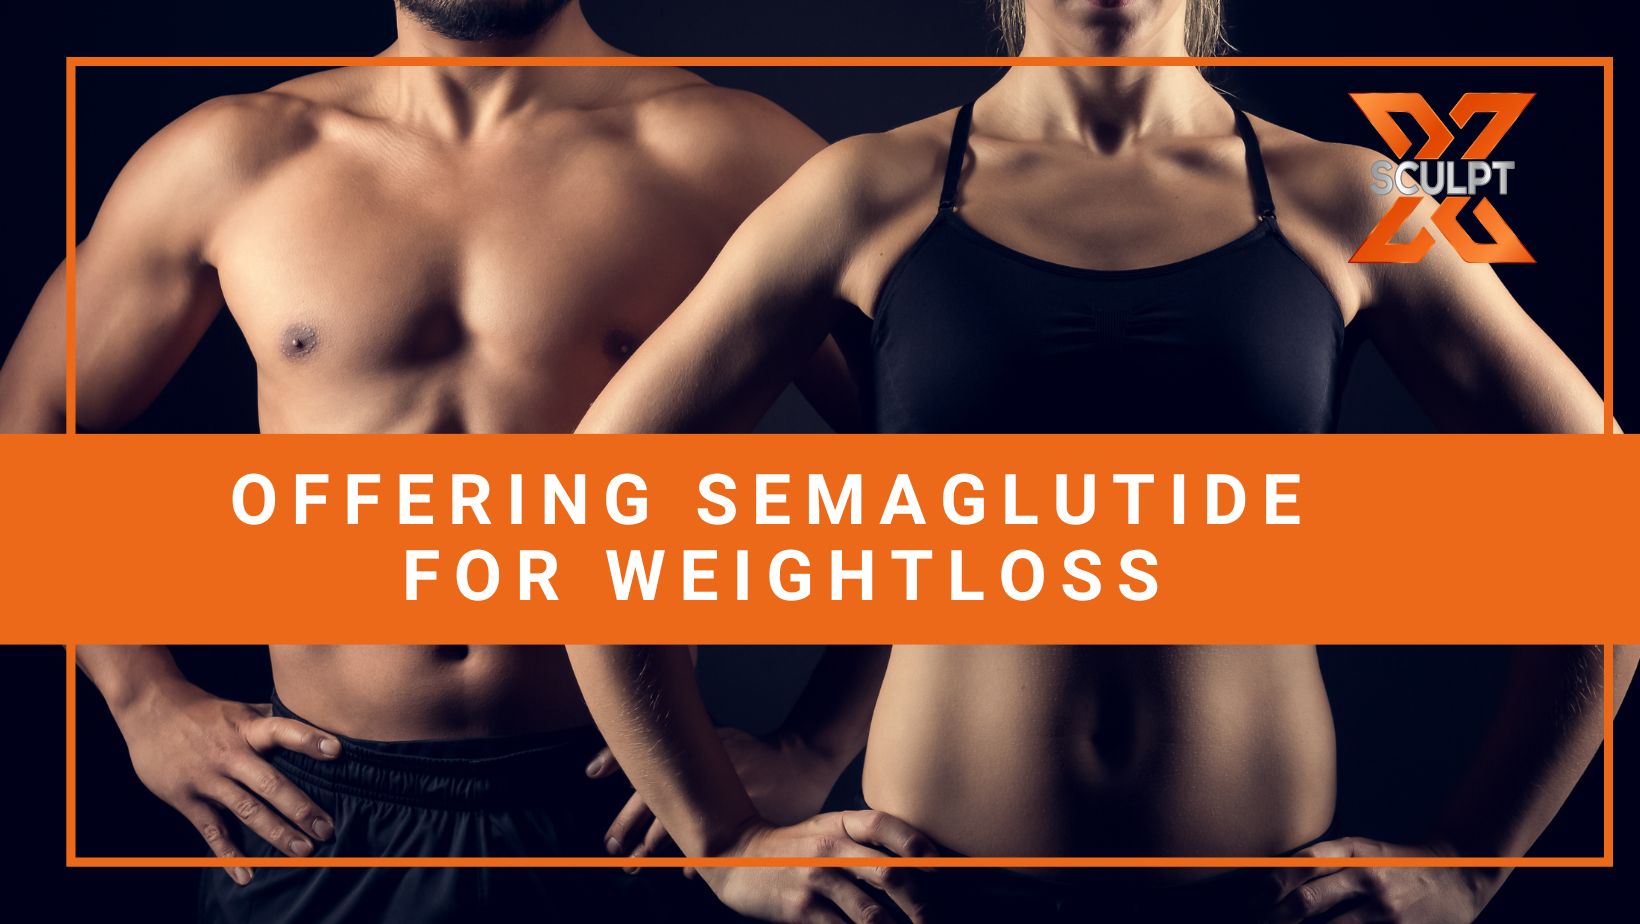 semaglutide injections near me - Chicago Illinois